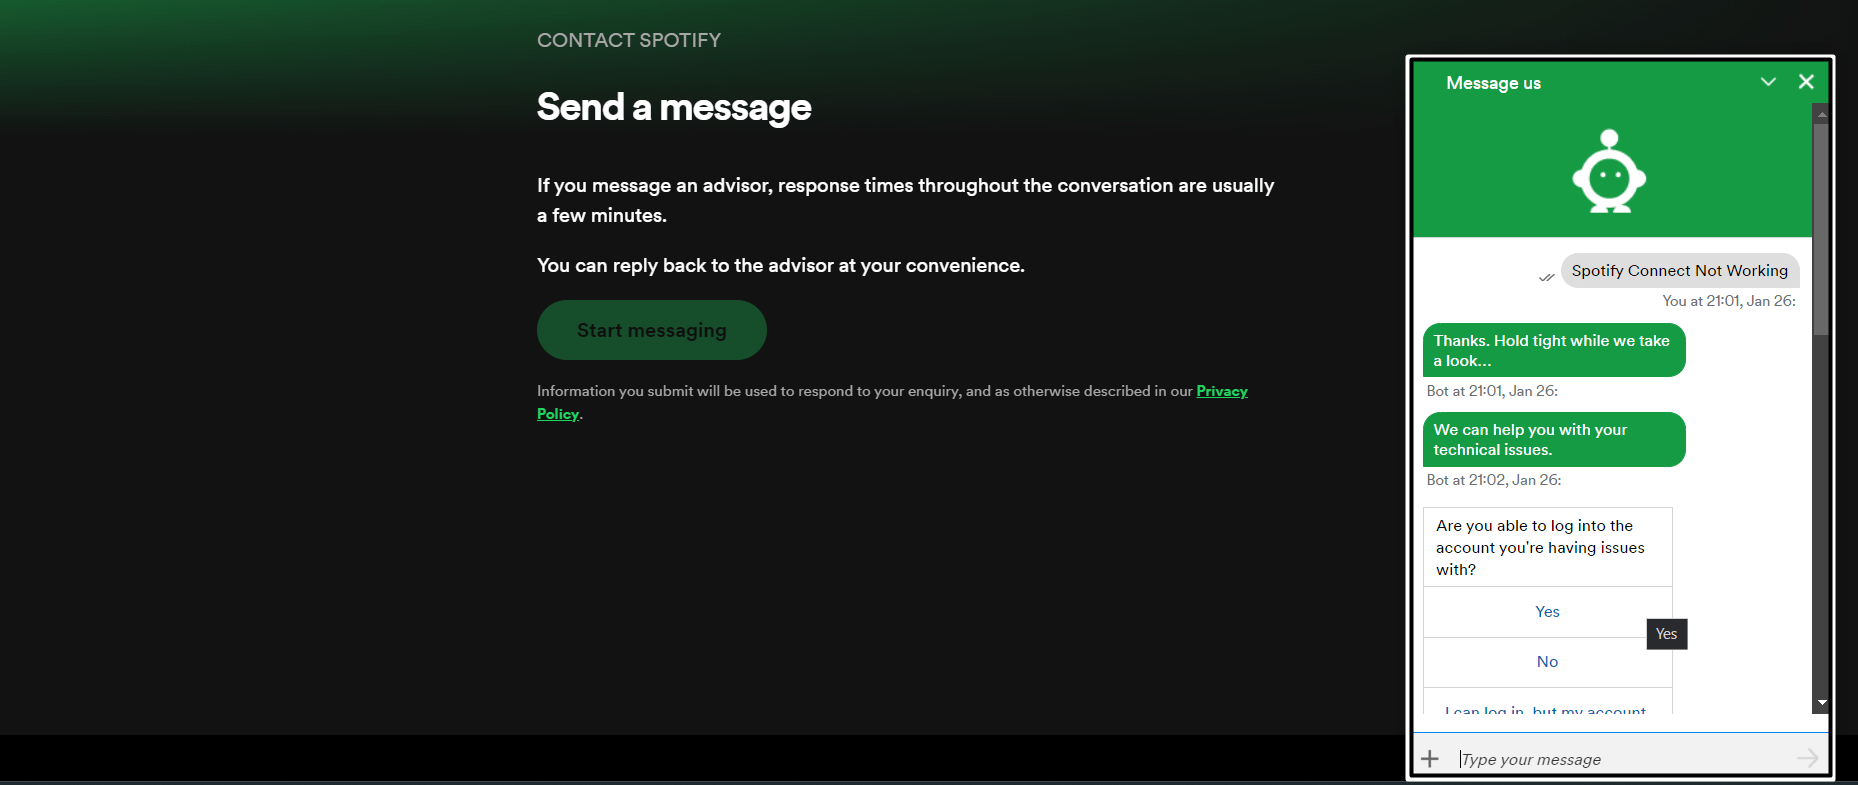 Contact Spotify support to fix Spotify Connect not working Issue